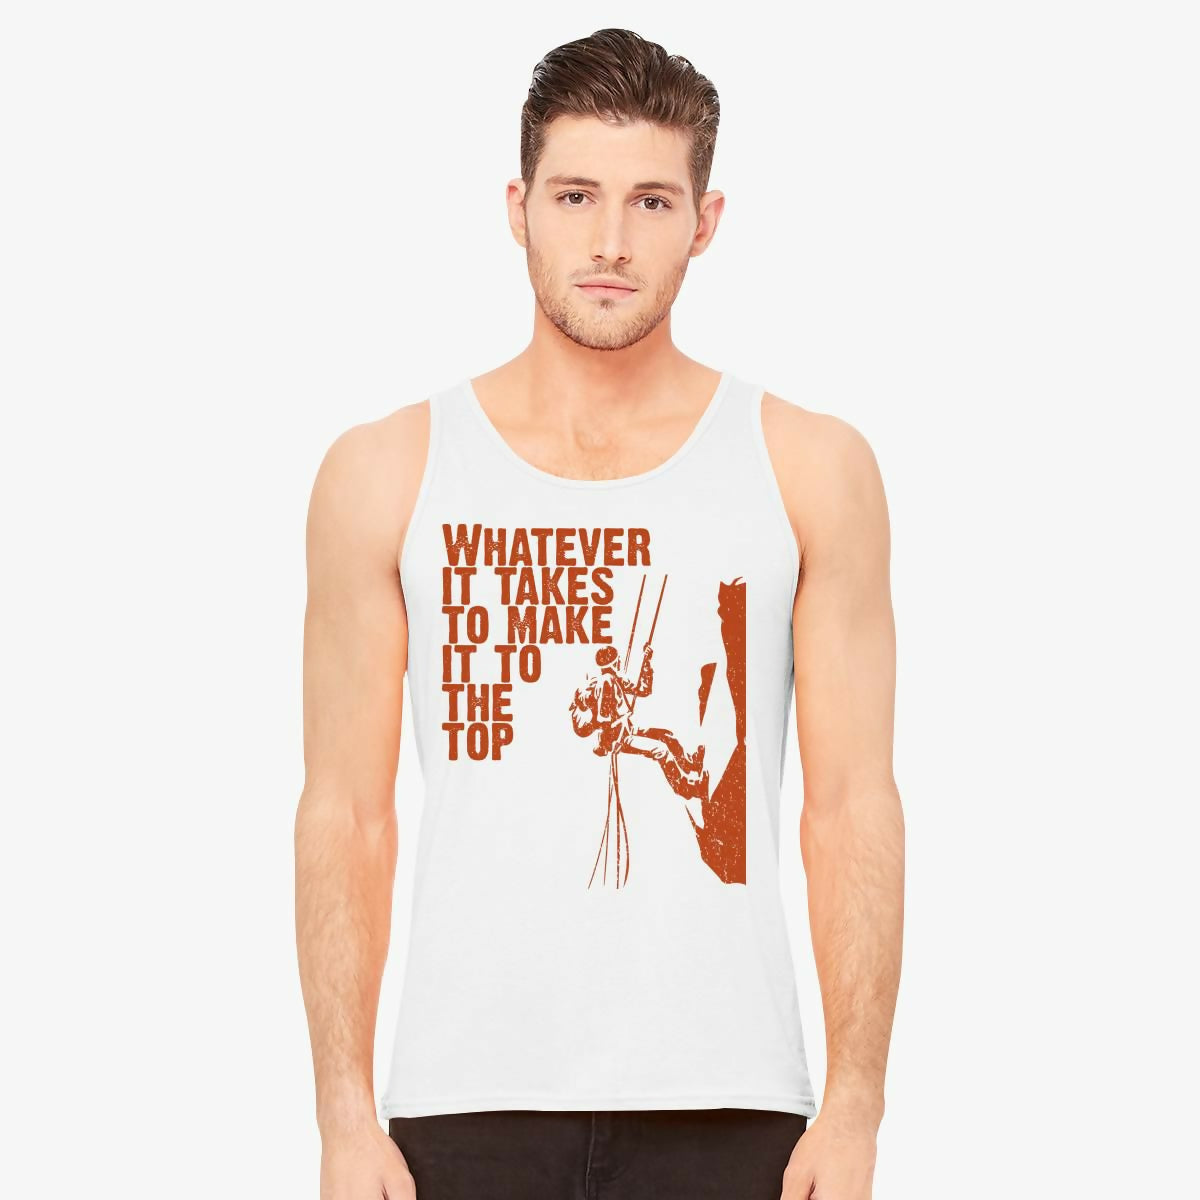 KHANANIS Whatever it takes to make it to the top T-Shirt sando for men - ValueBox